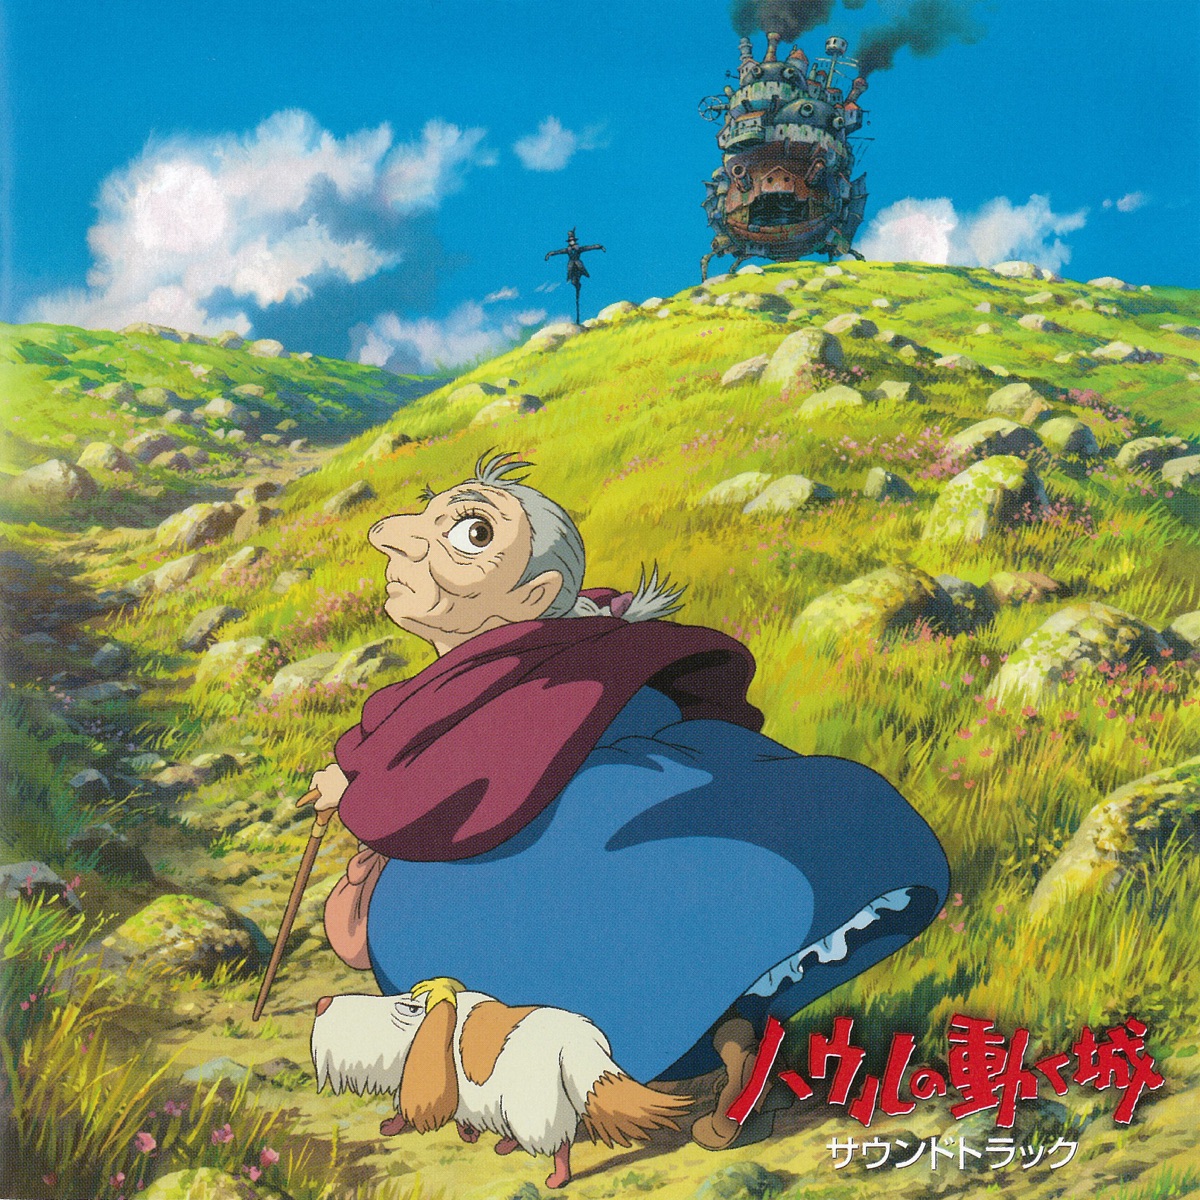 Castle in the Sky (Original Soundtrack) by Joe Hisaishi on Apple Music